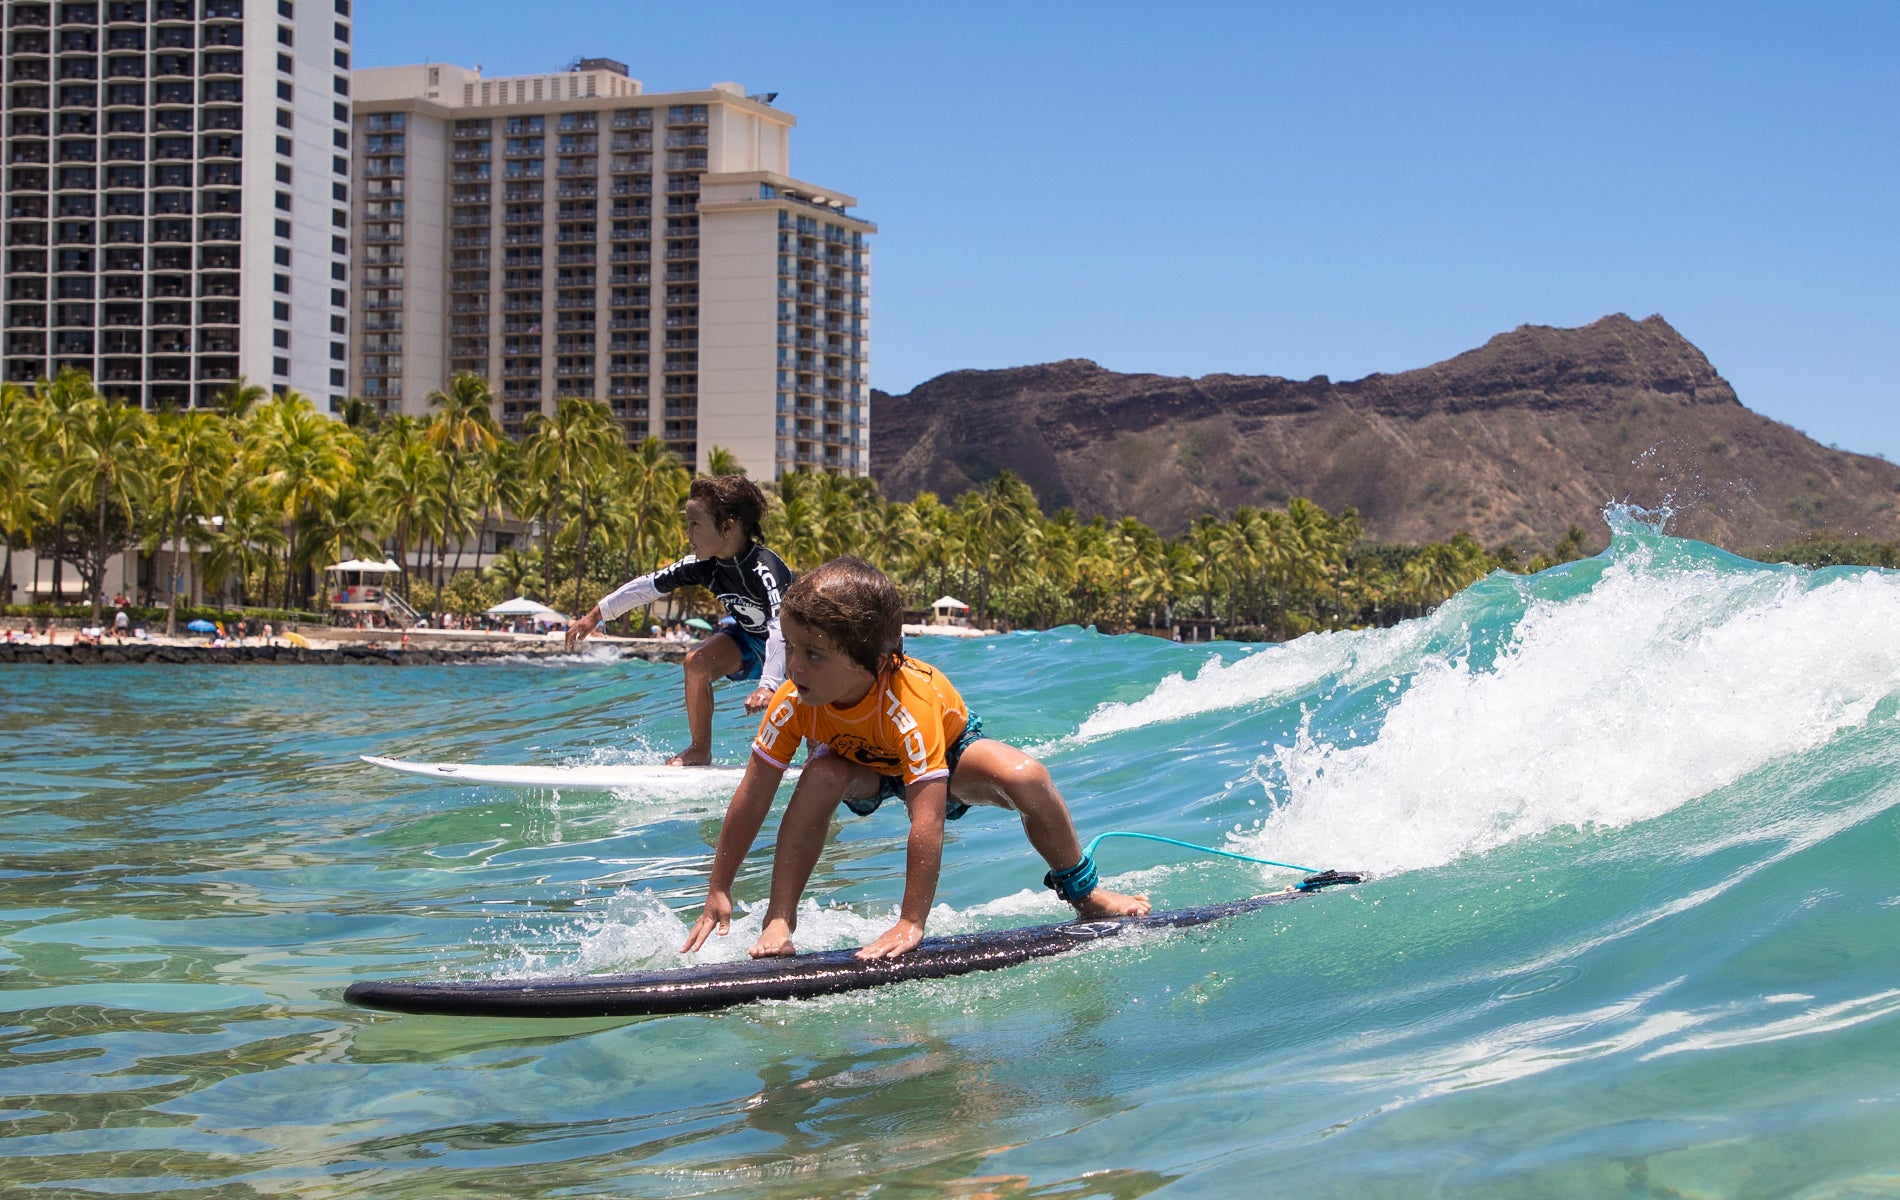 Kokua division competitors showcasing their skills in the T&C Surf Grom Contest